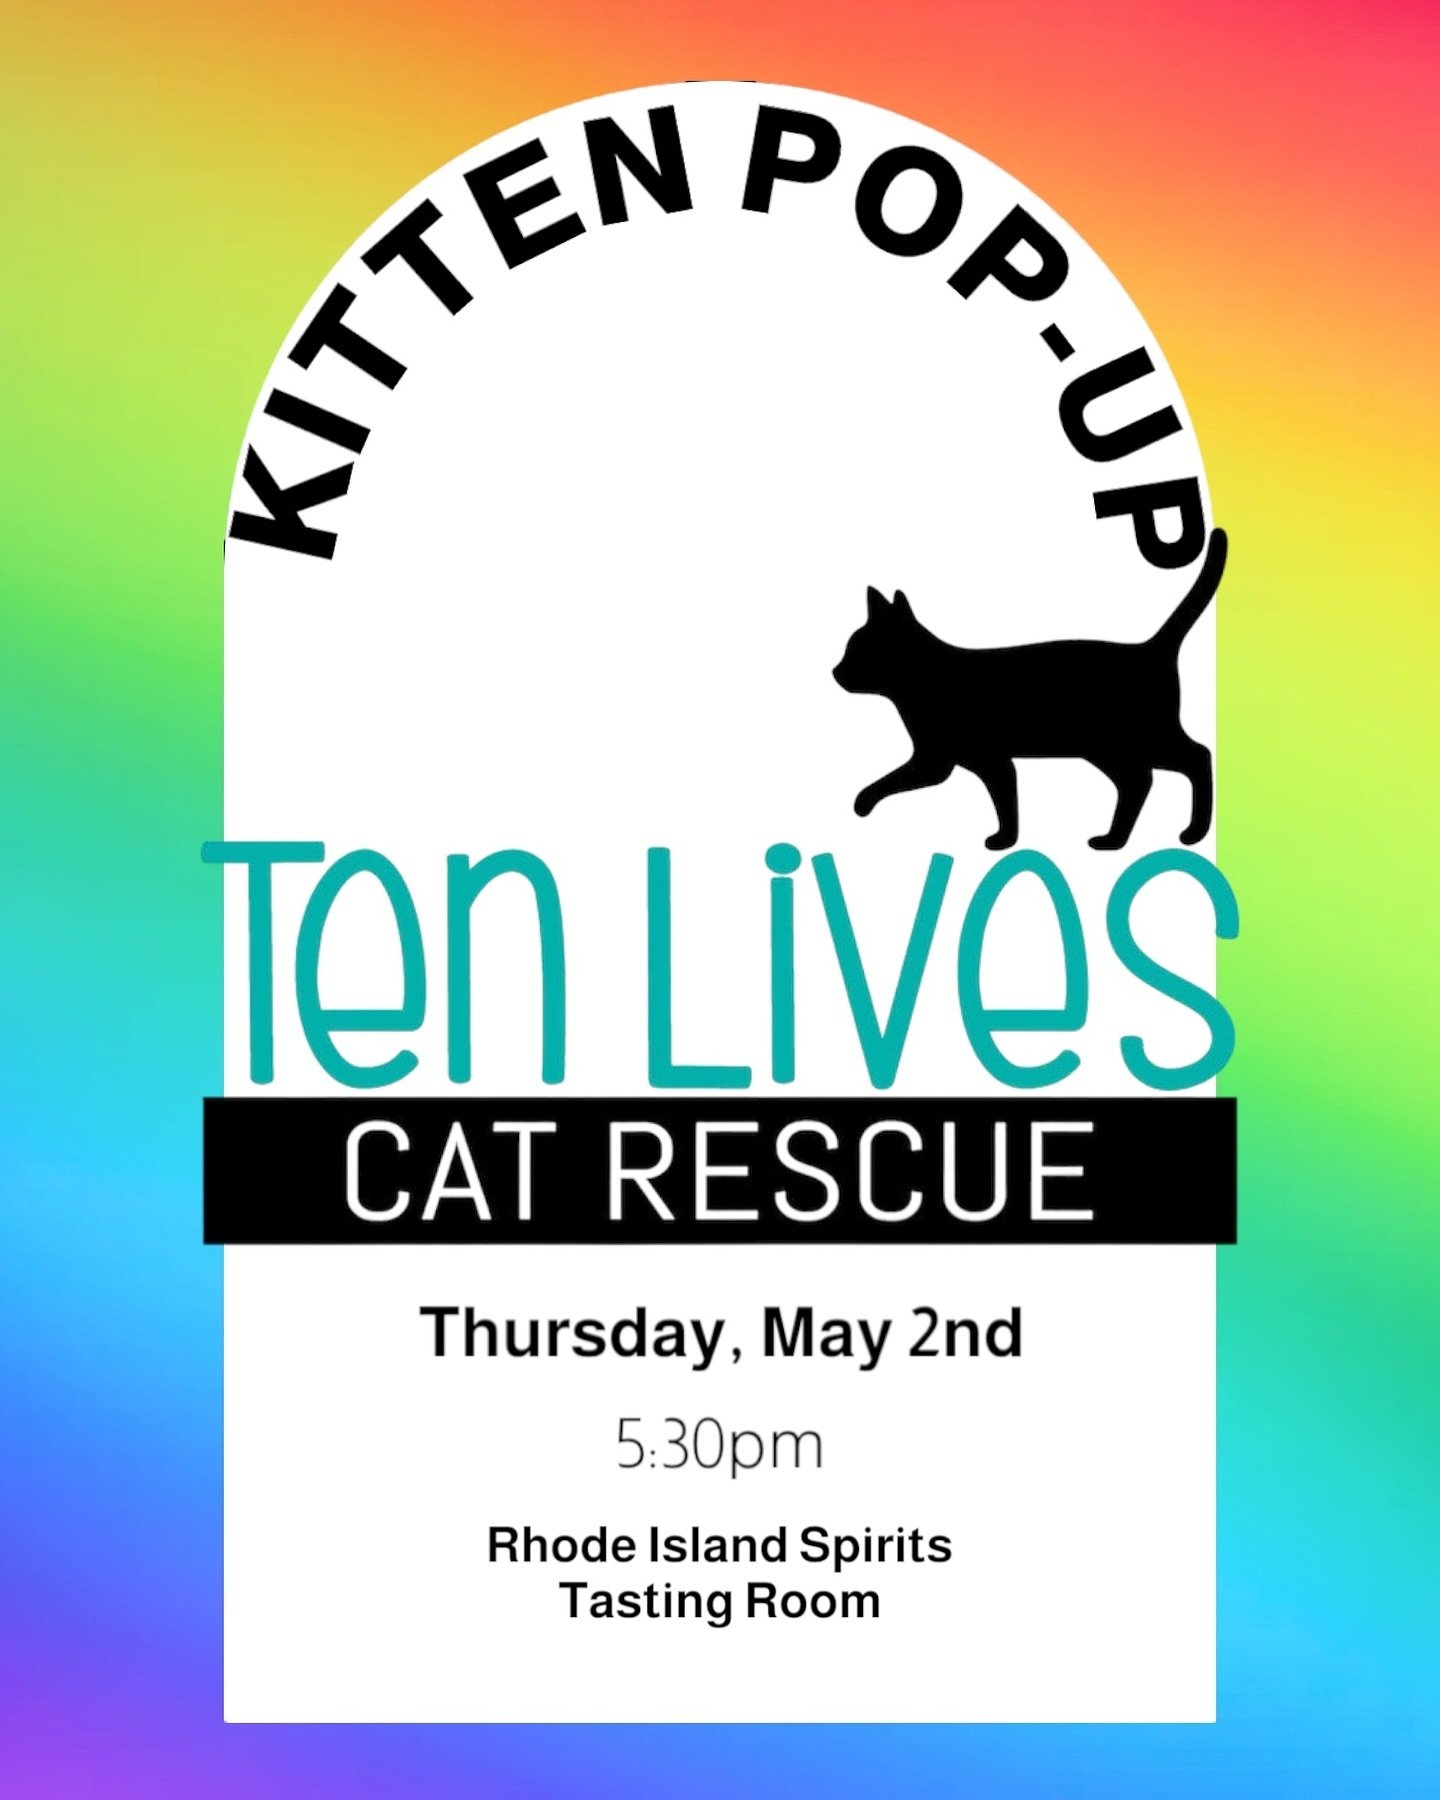 Support @tenlivescatrescue while cuddling adorable kittens at the Rhode Island Spirits tasting room on Thursday, May 2nd! 

We will be crafting up a special cocktail for the event and will donate $2 for every drink sold! Bun Buds will also be on site